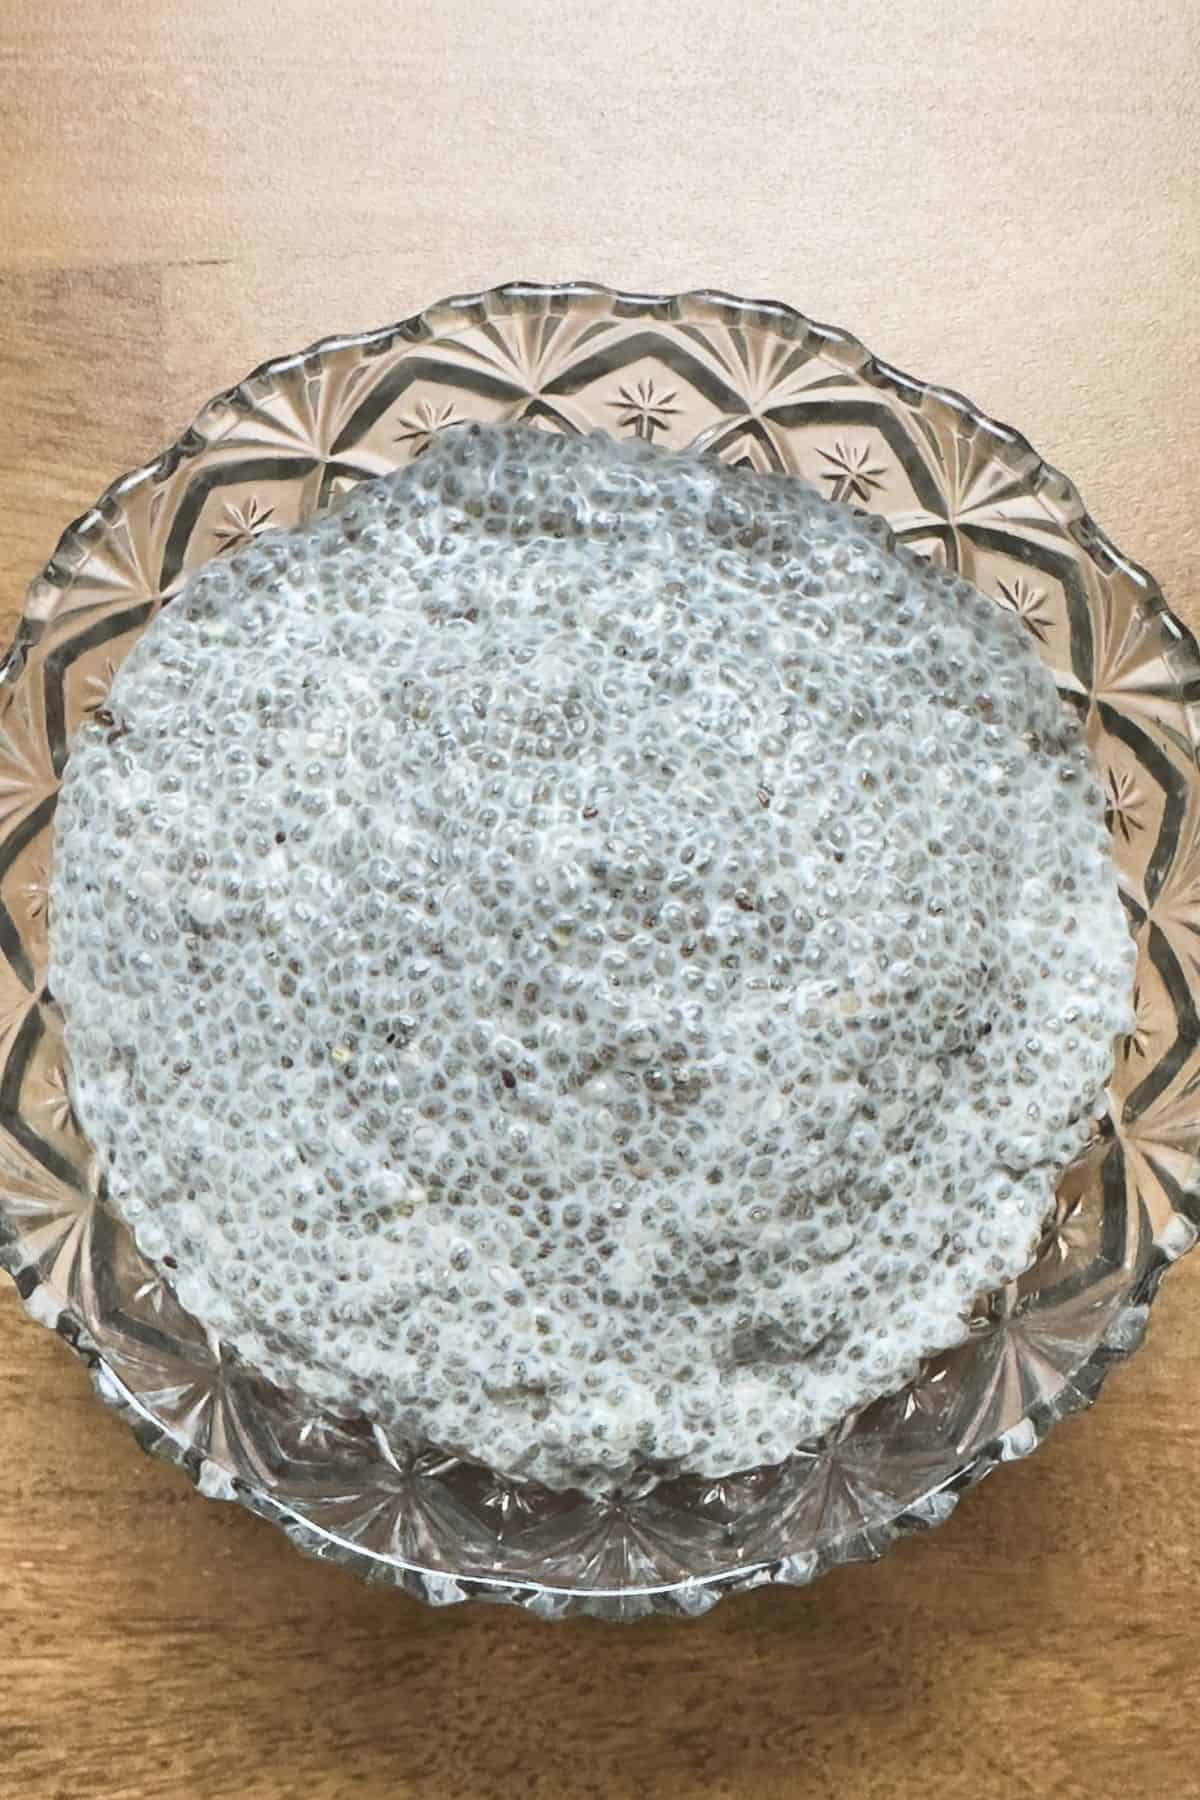 A glass bowl of mixed chia seeds and coconut milk on a wooden surface, with a spoon, showing the start of the gelling process for chia pudding after setting for 2 hours.